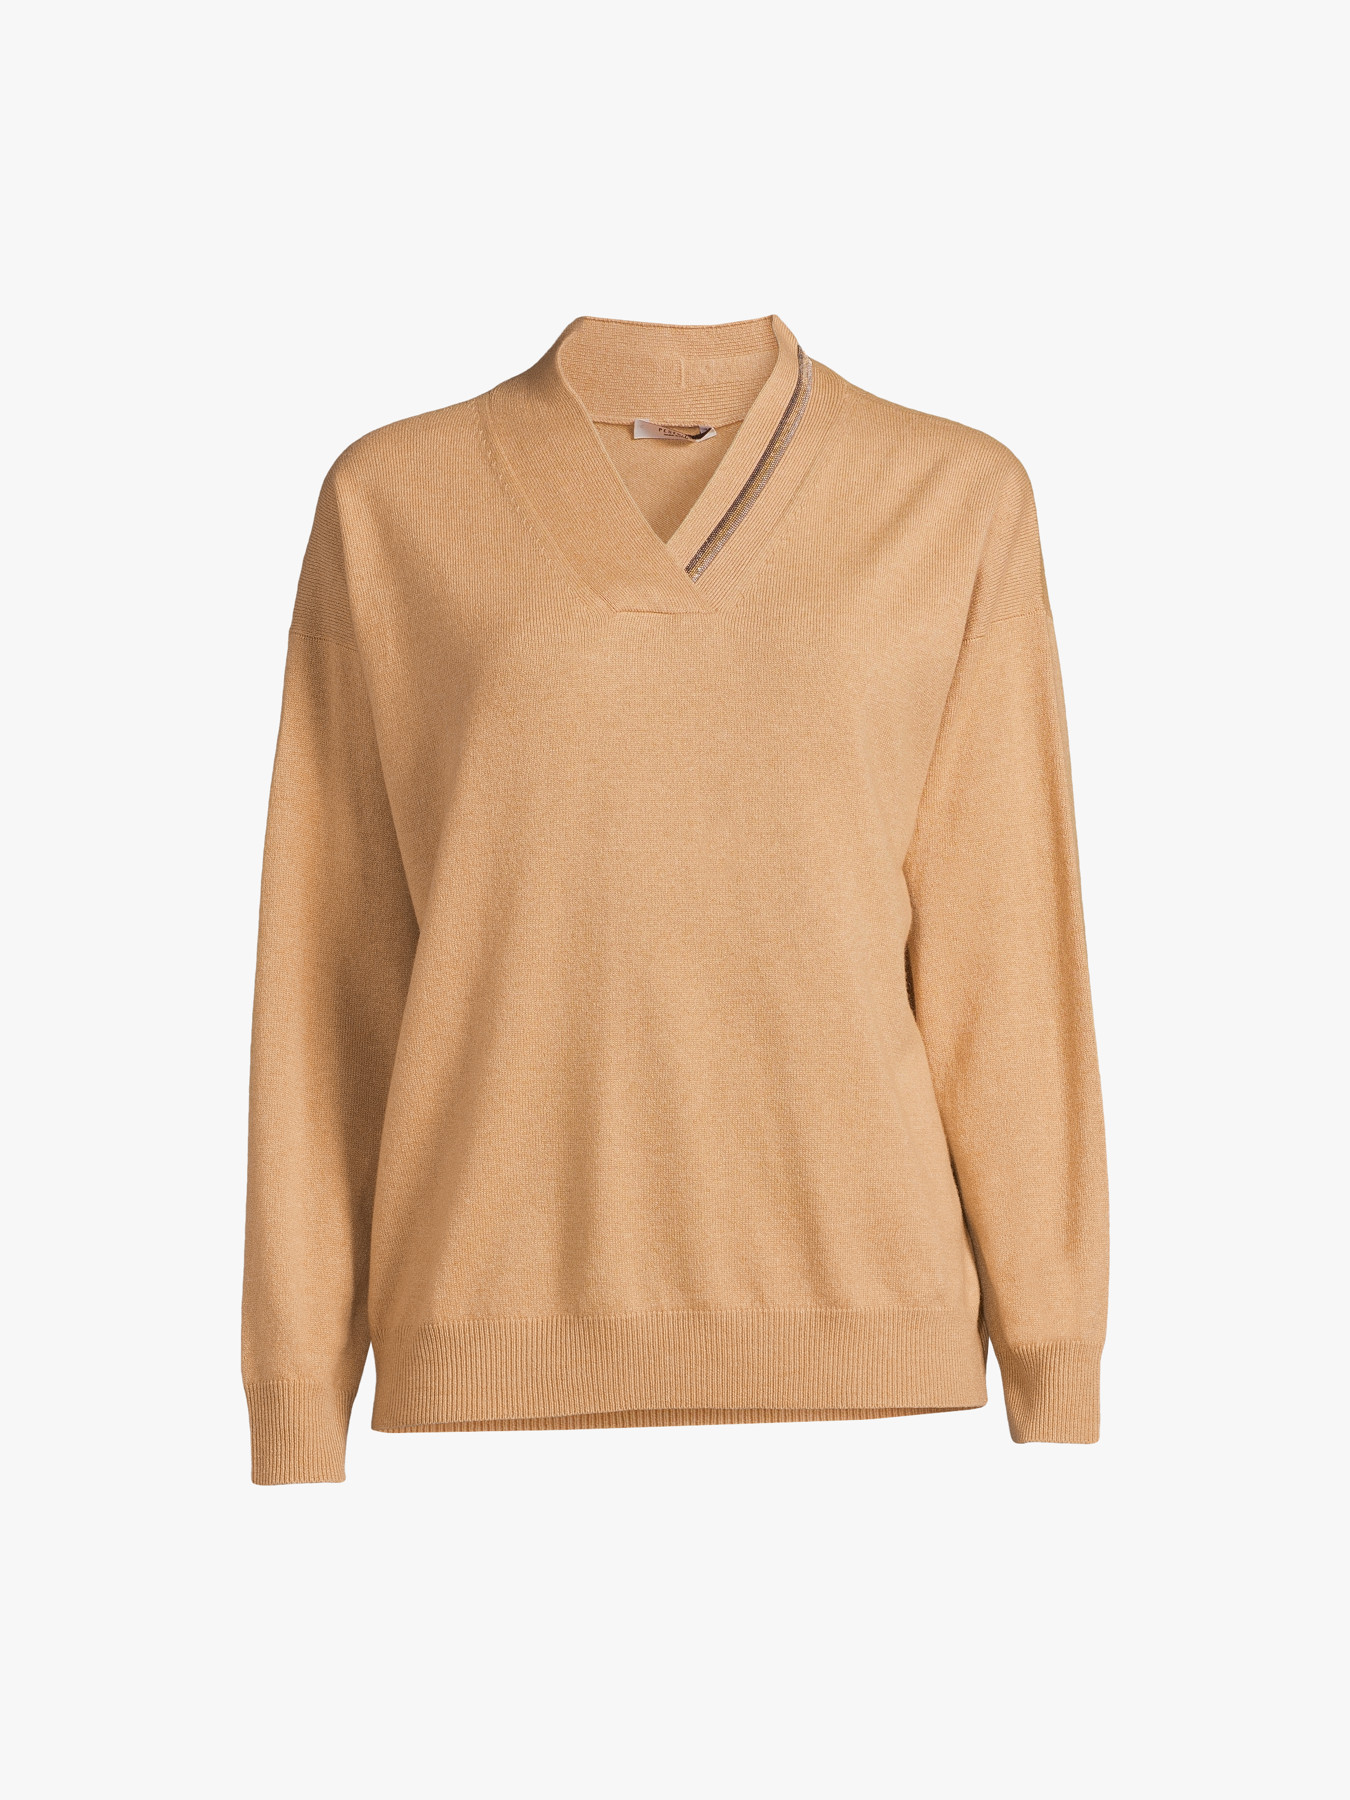 Peserico Synthetic Sweaters Brown Womens Jumpers and knitwear Peserico Jumpers and knitwear 